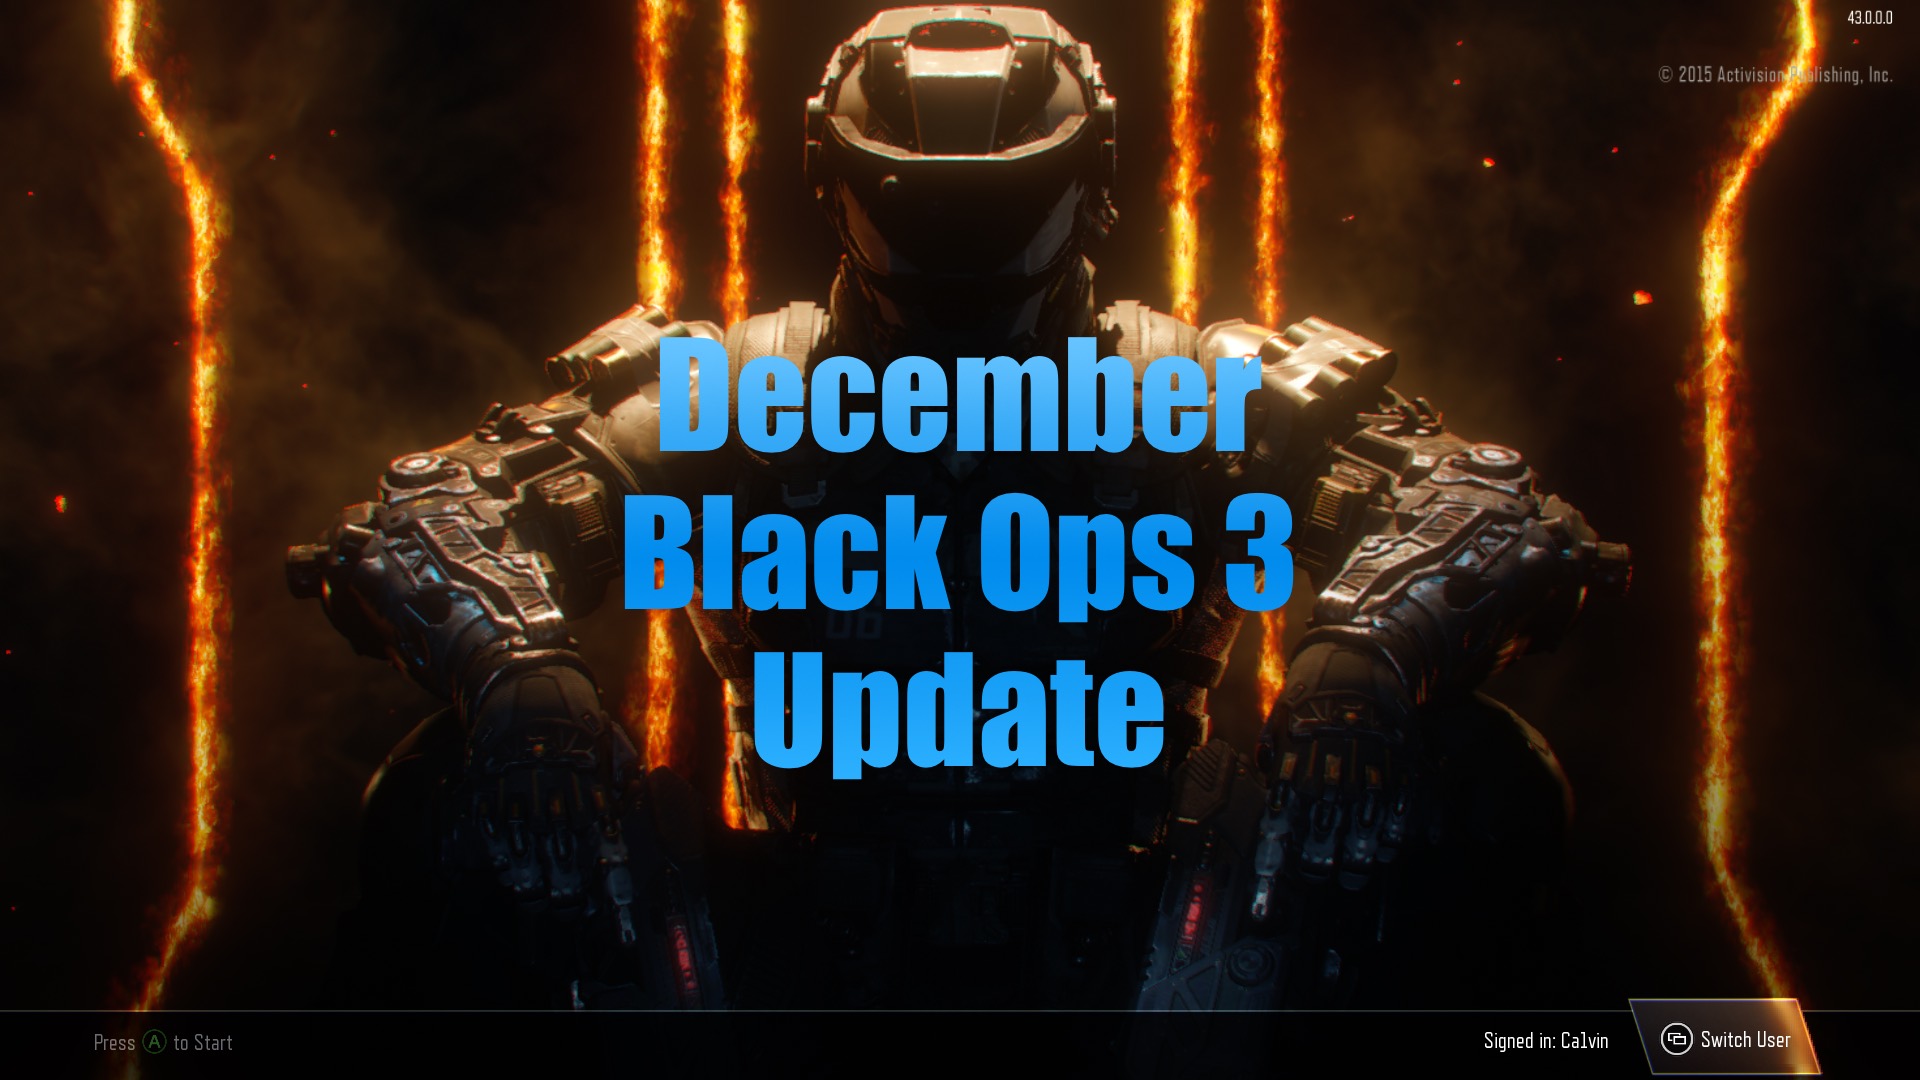 What you need to know about the December Black Ops 3 update on PS4, Xbox One and PC.